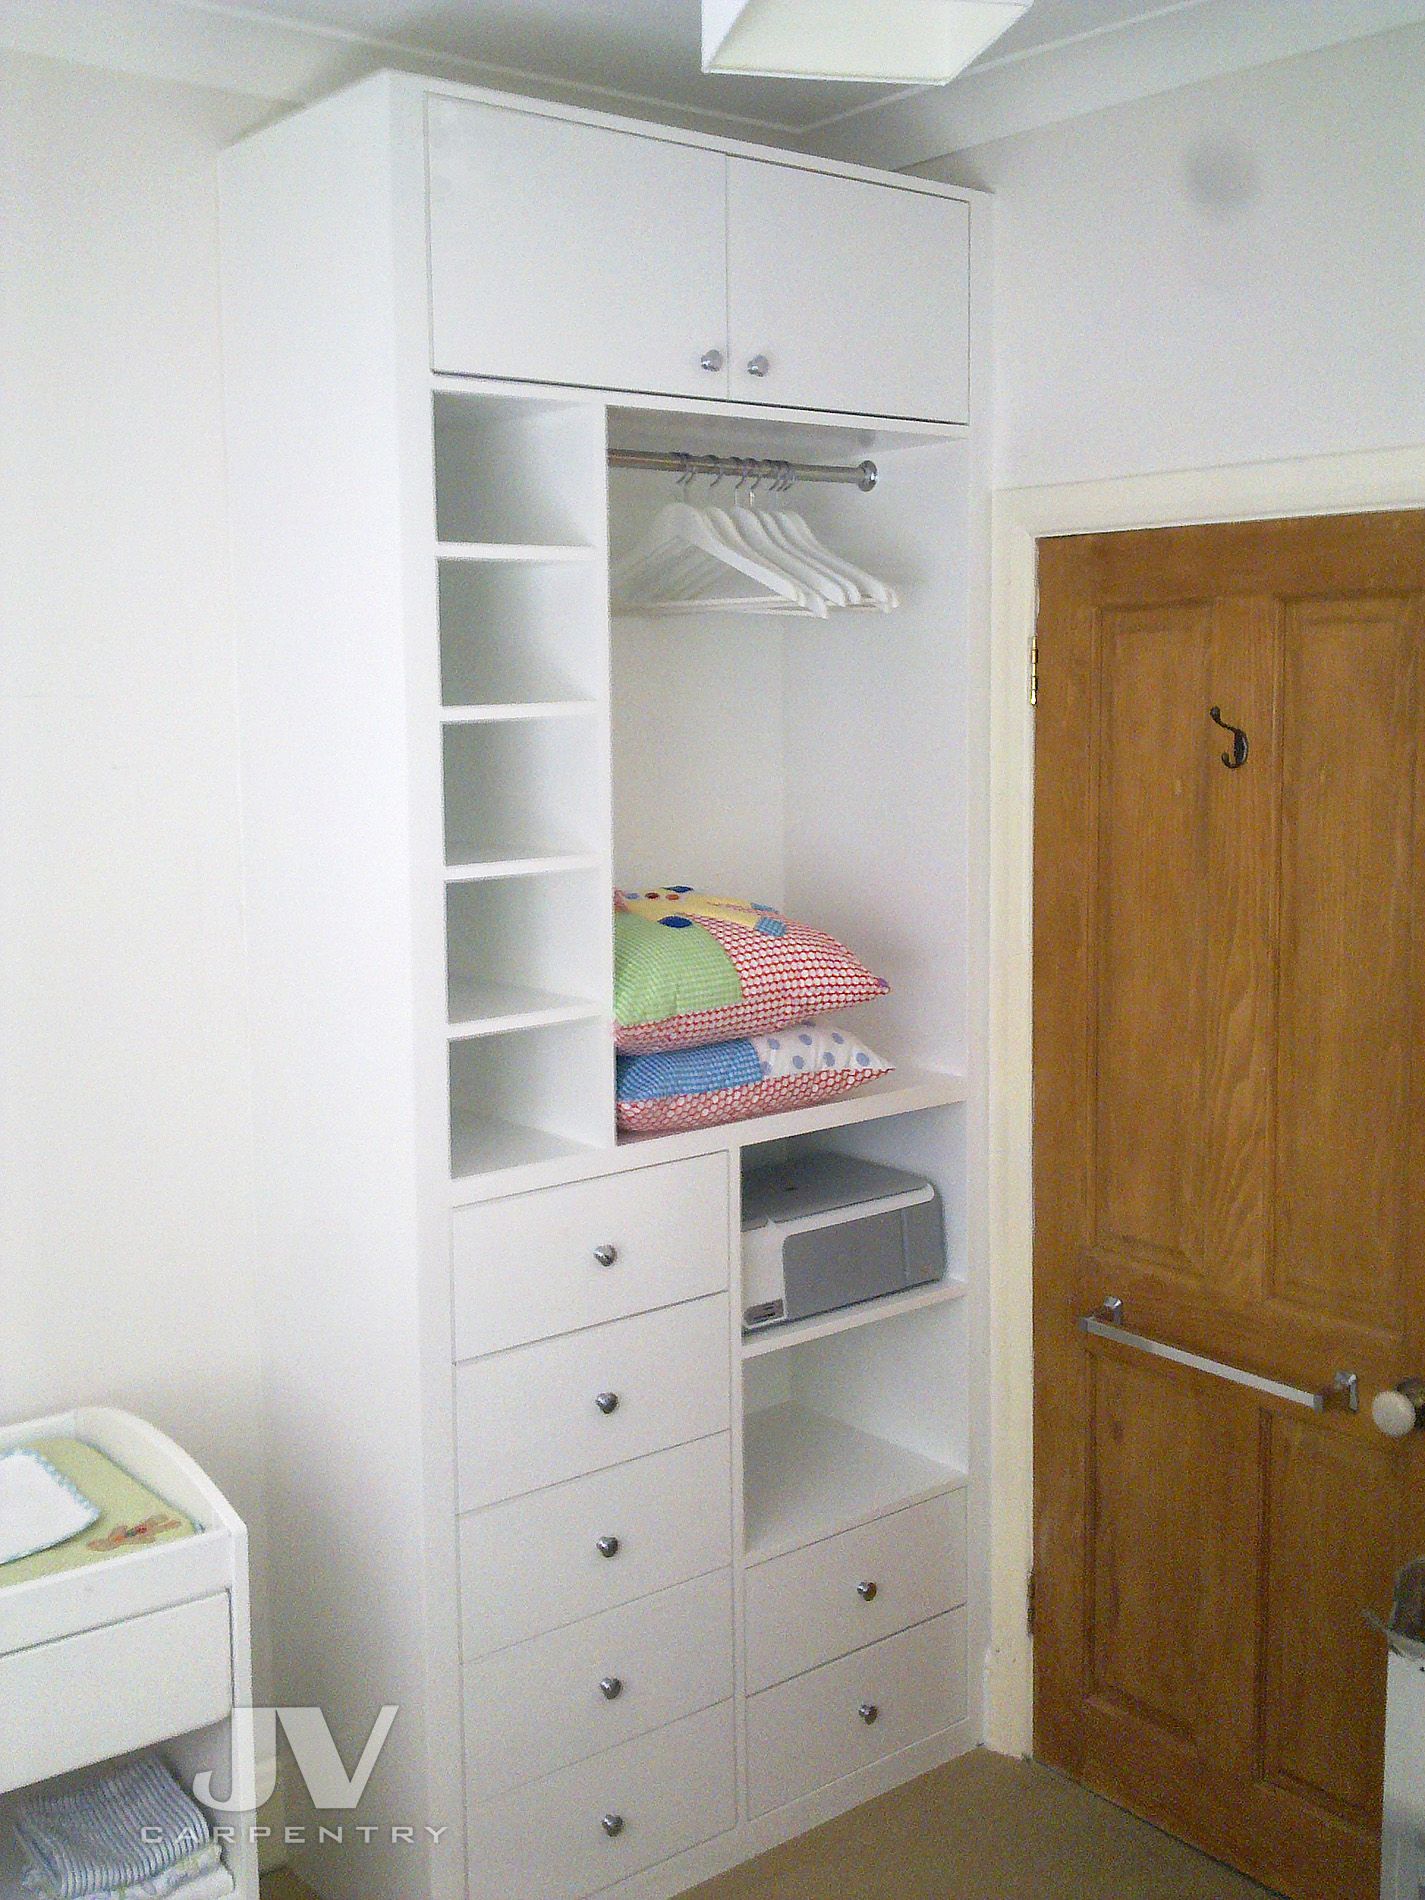 14 Fitted Wardrobe Ideas For A Small Bedroom | Jv Carpentry Pertaining To Short Wardrobes (View 14 of 15)